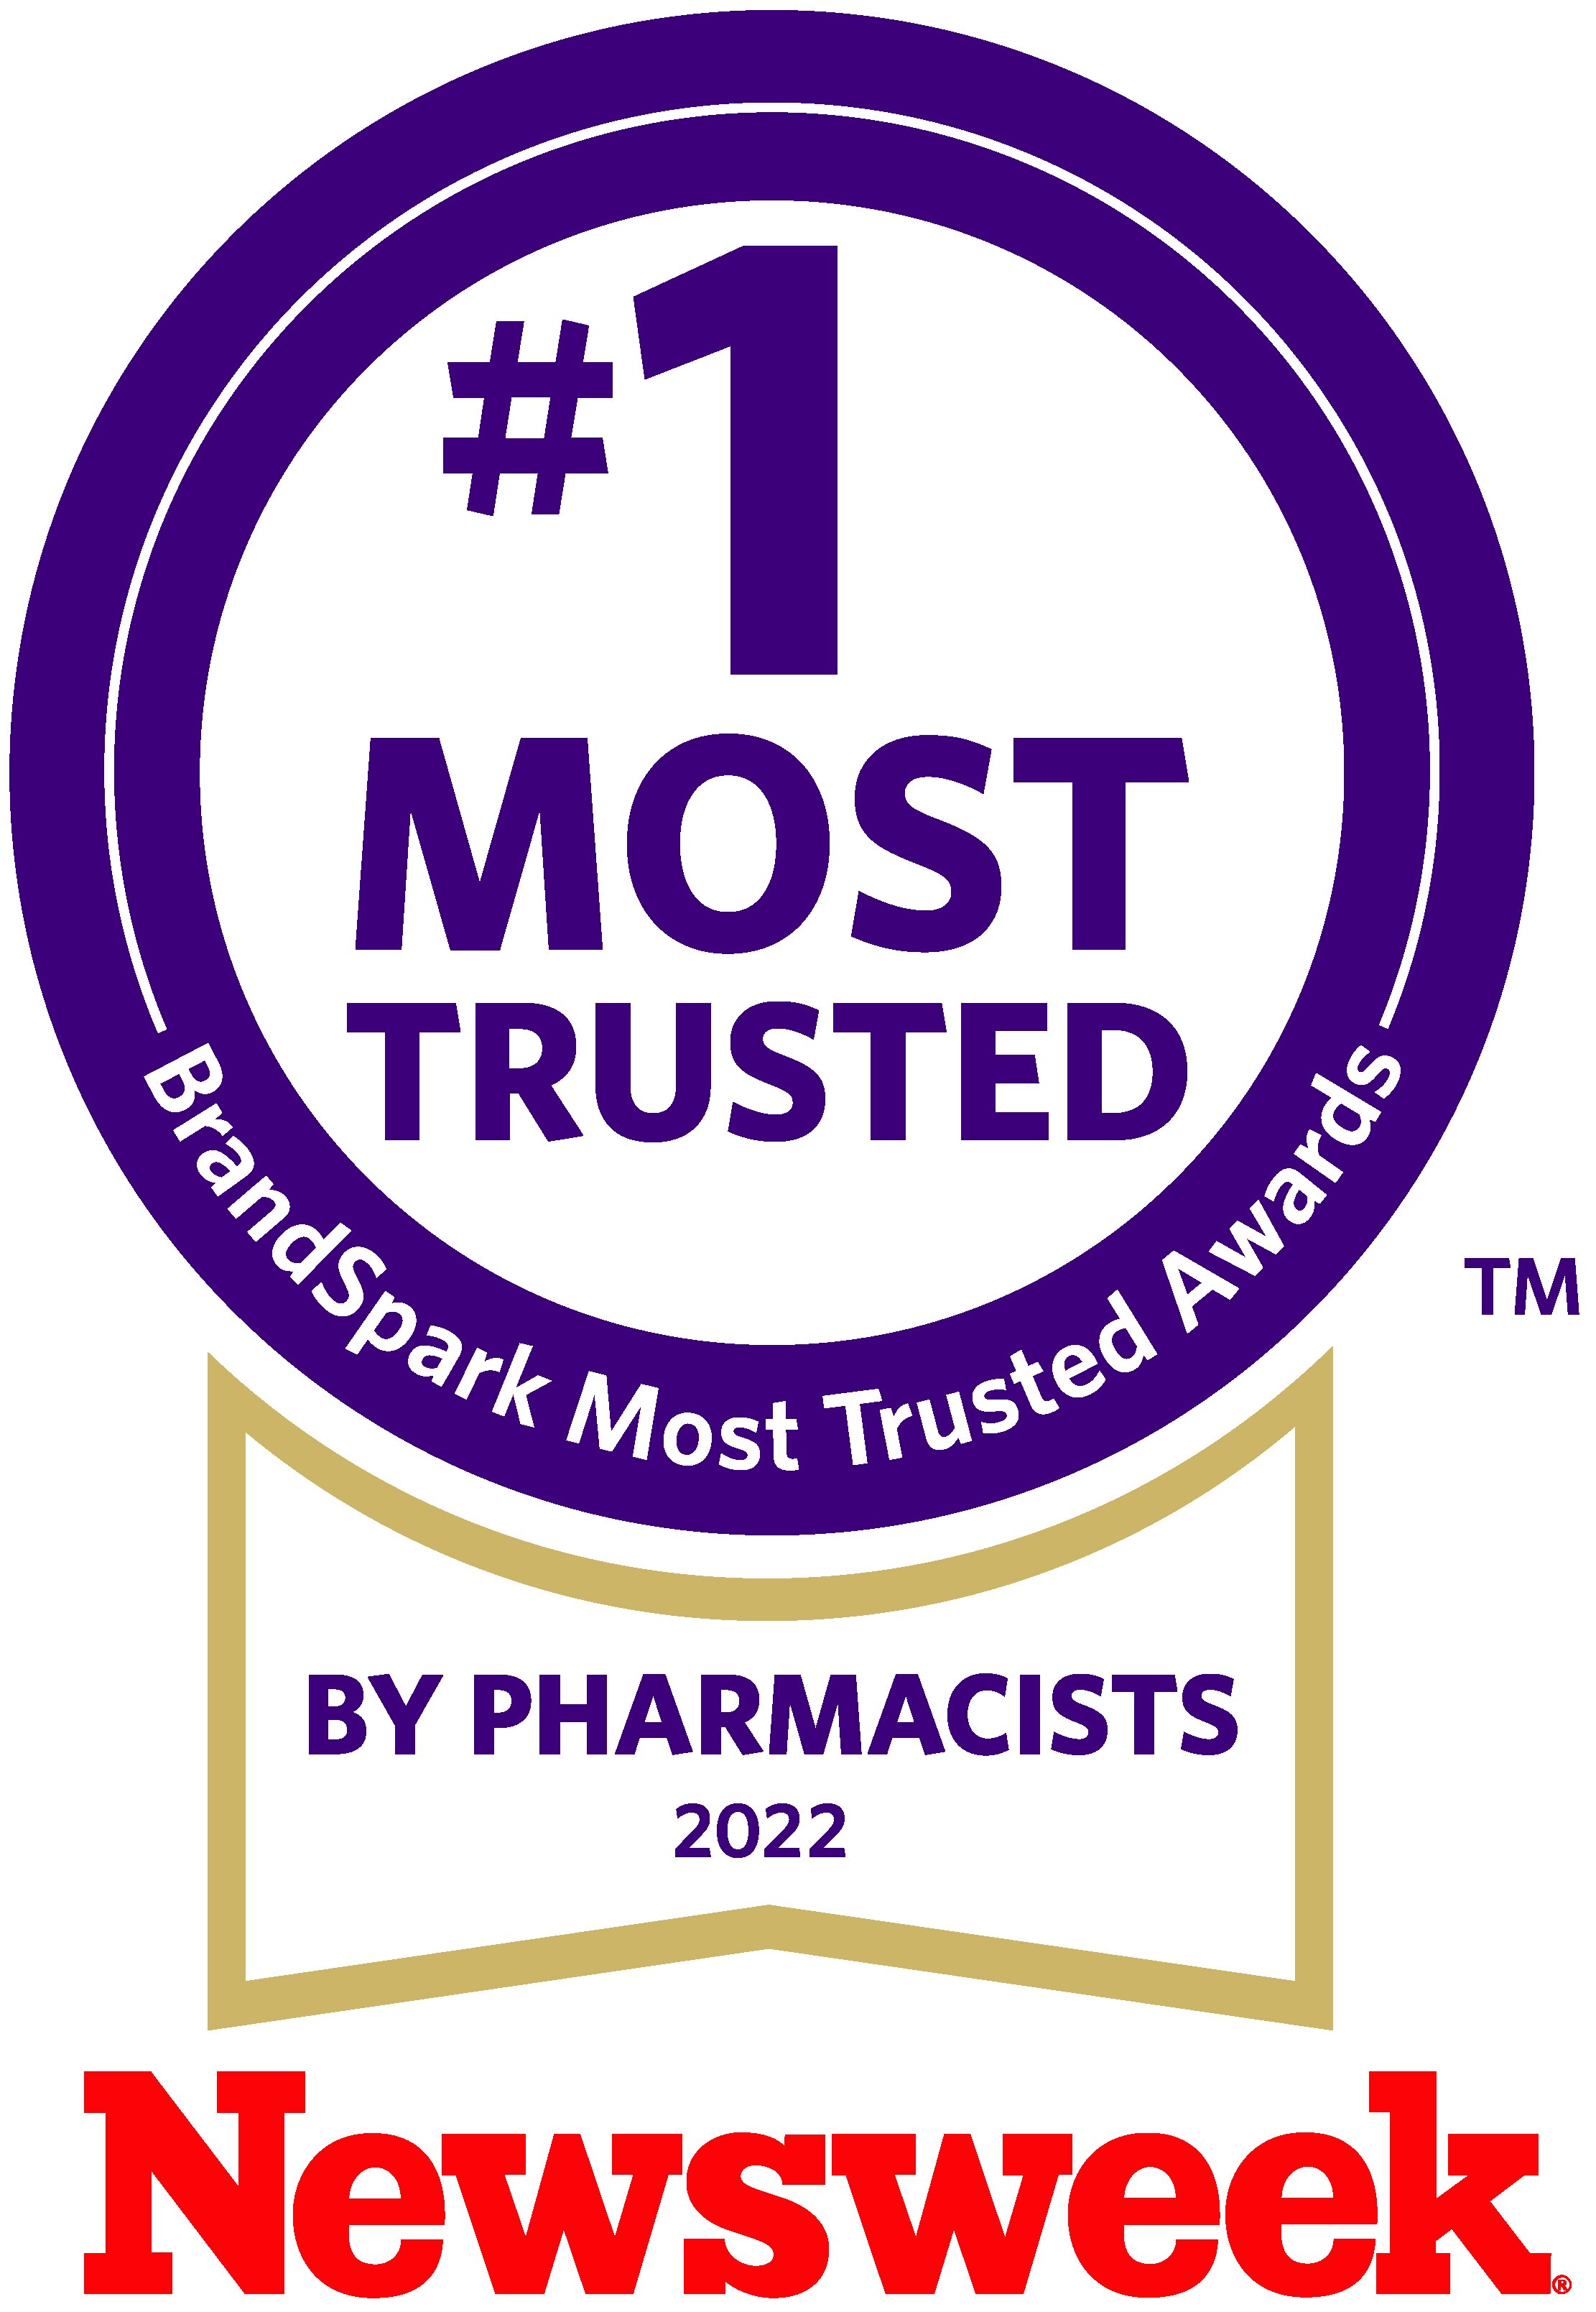 bmta_#1_most_trusted_circle_by_pharmacists.jpg